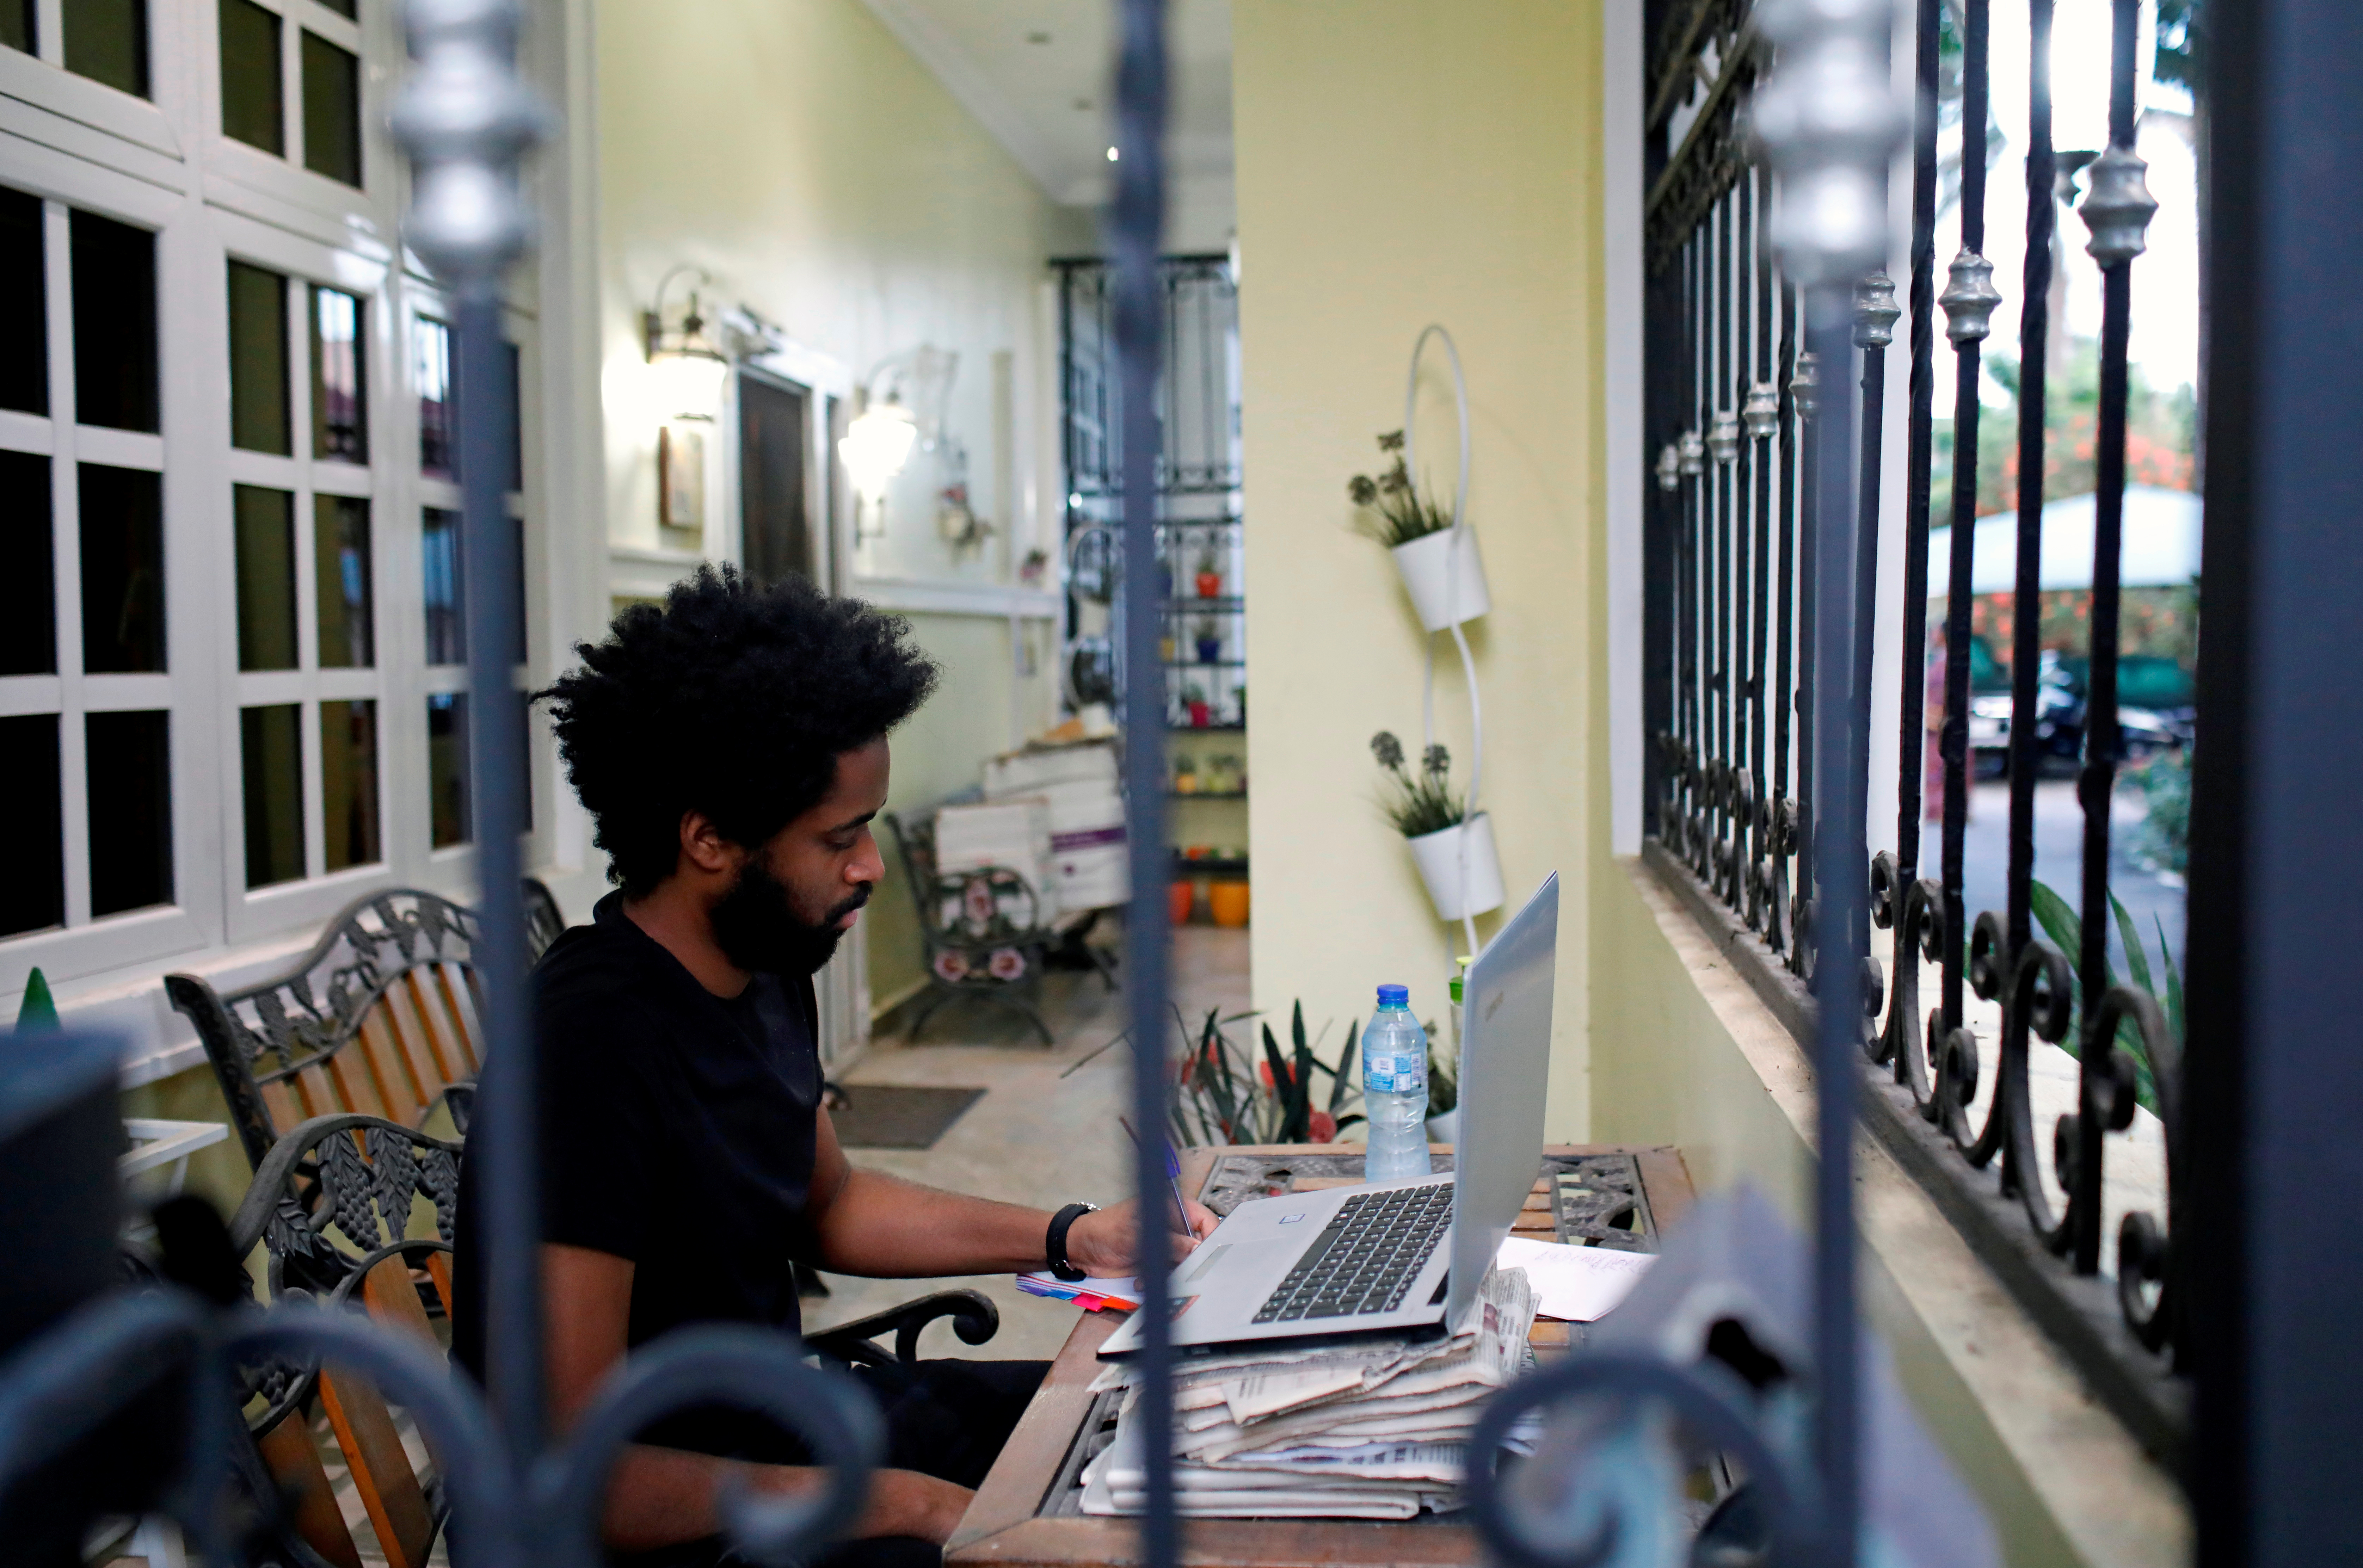 Alexander Caiafas, a 25 year-old data analyst, is seen working through a window into his home in Ikoyi, as authorities around the world impose various guidelines on lockdowns and social distancing to curb the spread of coronavirus disease (COVID-19), in Lagos, Nigeria May 25, 2020. When asked, what will you miss most about being in lockdown? Alexander replied: ' Spending quality time with relatives and parents because you know, thatÕs often hard to do. Secondly, I would say I miss speaking over the phone to close friends like on FaceTime, HouseParty, Zoom, all those kinds of applications'.  Picture taken May 25, 2020. REUTERS/Temilade Adelaja - RC2LXG98YSTW